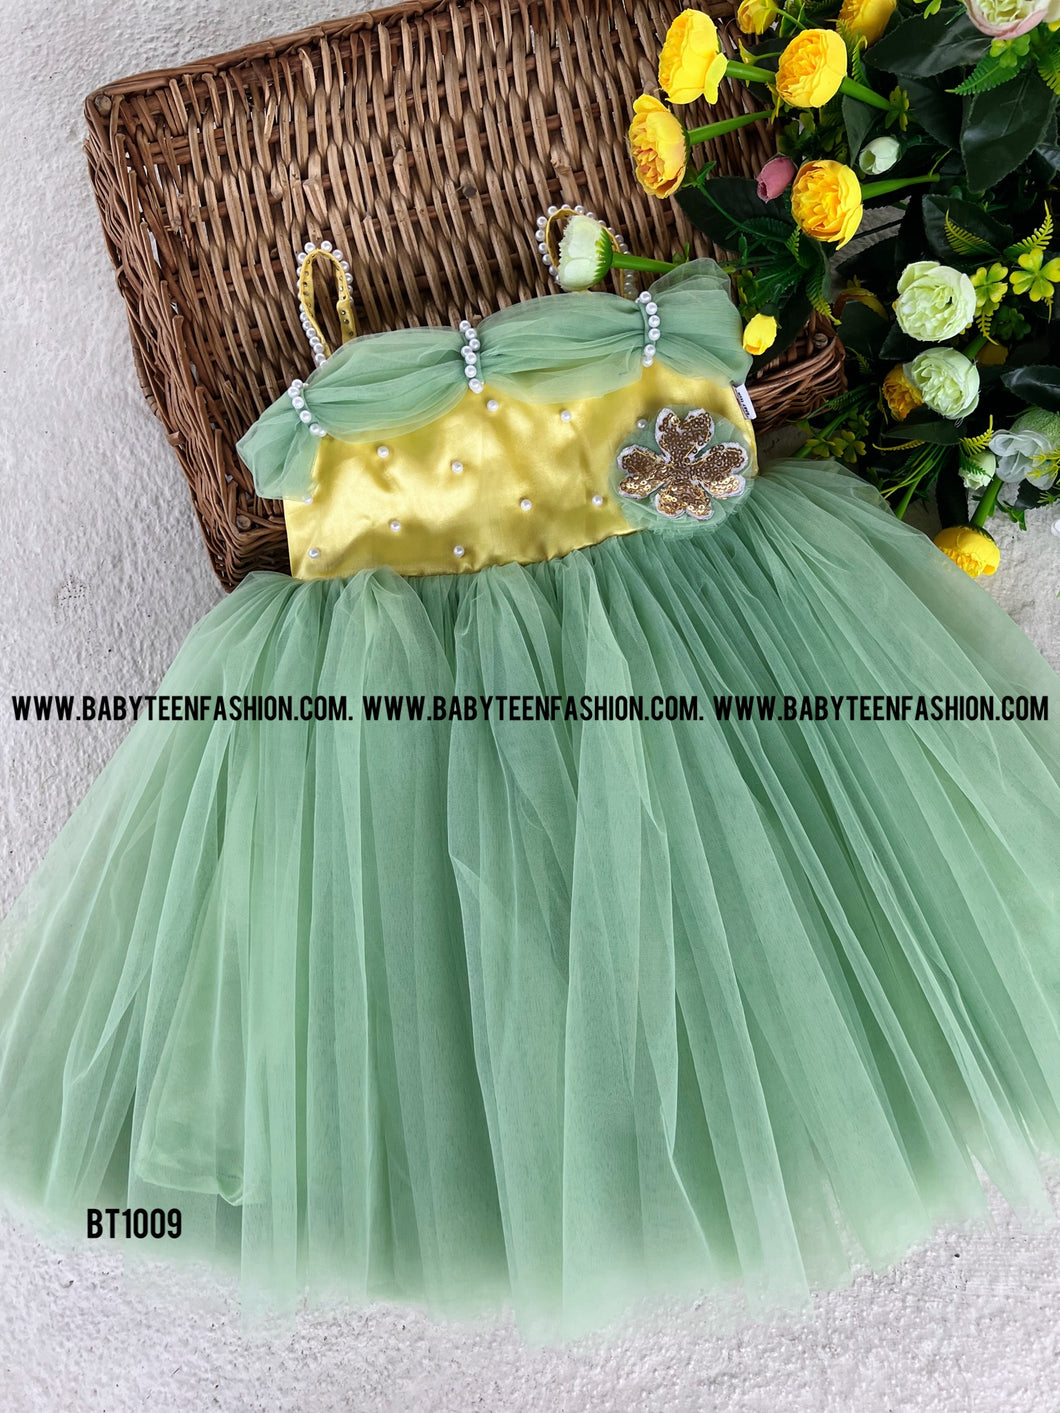 BT1009 Fluffy Green Birthday Frock with Straps and Pearl Highlights